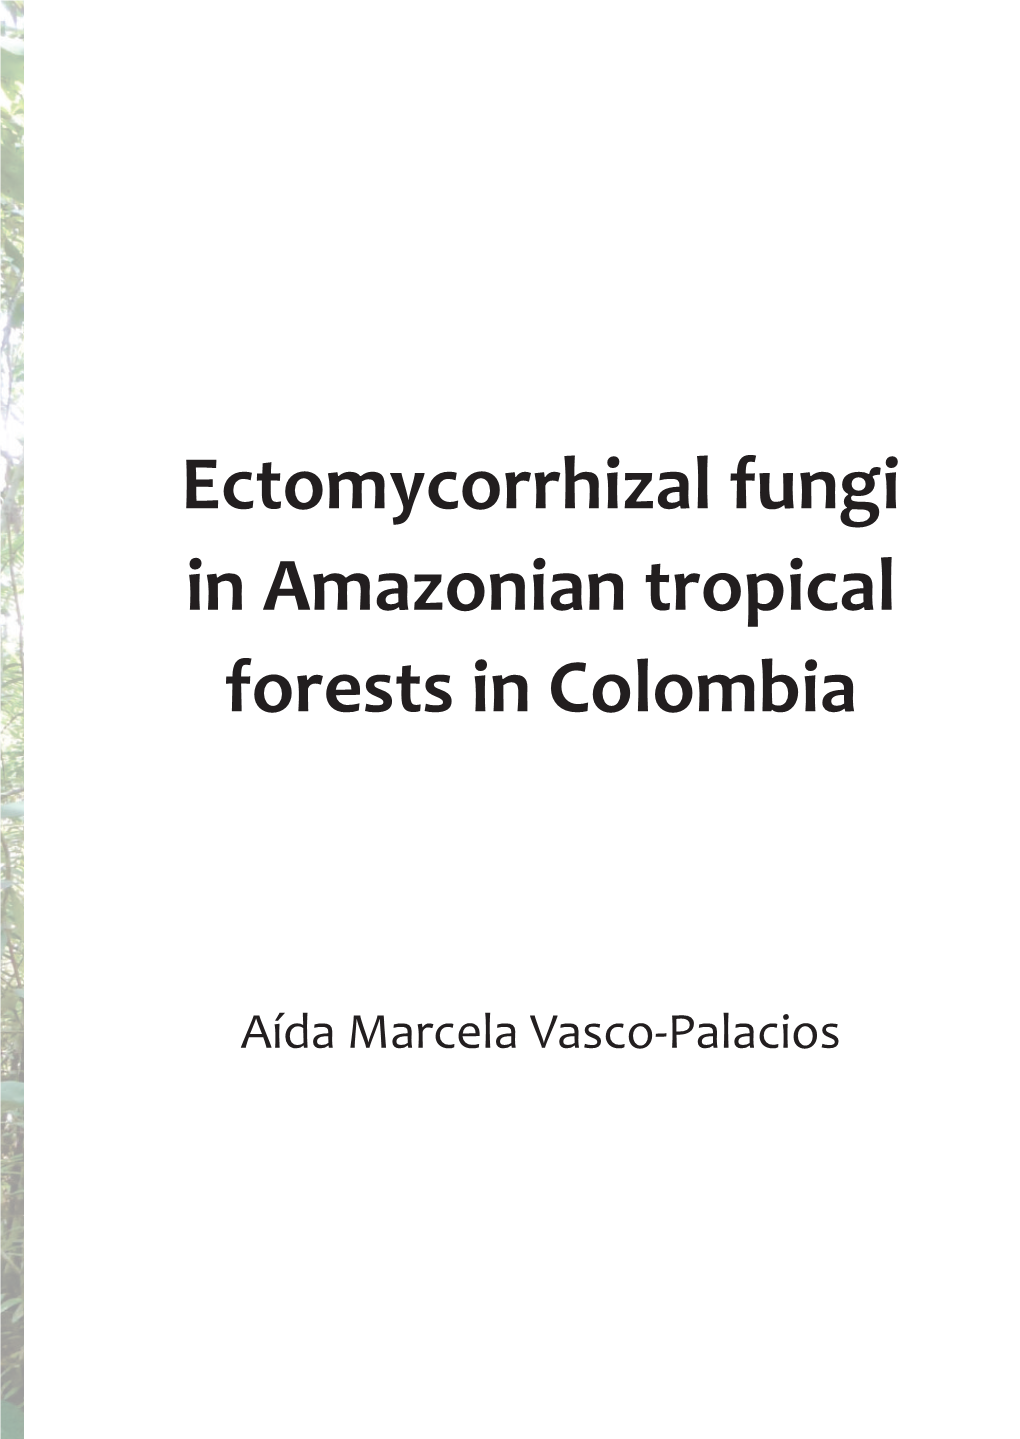 Ectomycorrhizal Fungi in Amazonian Tropical Forests in Colombia